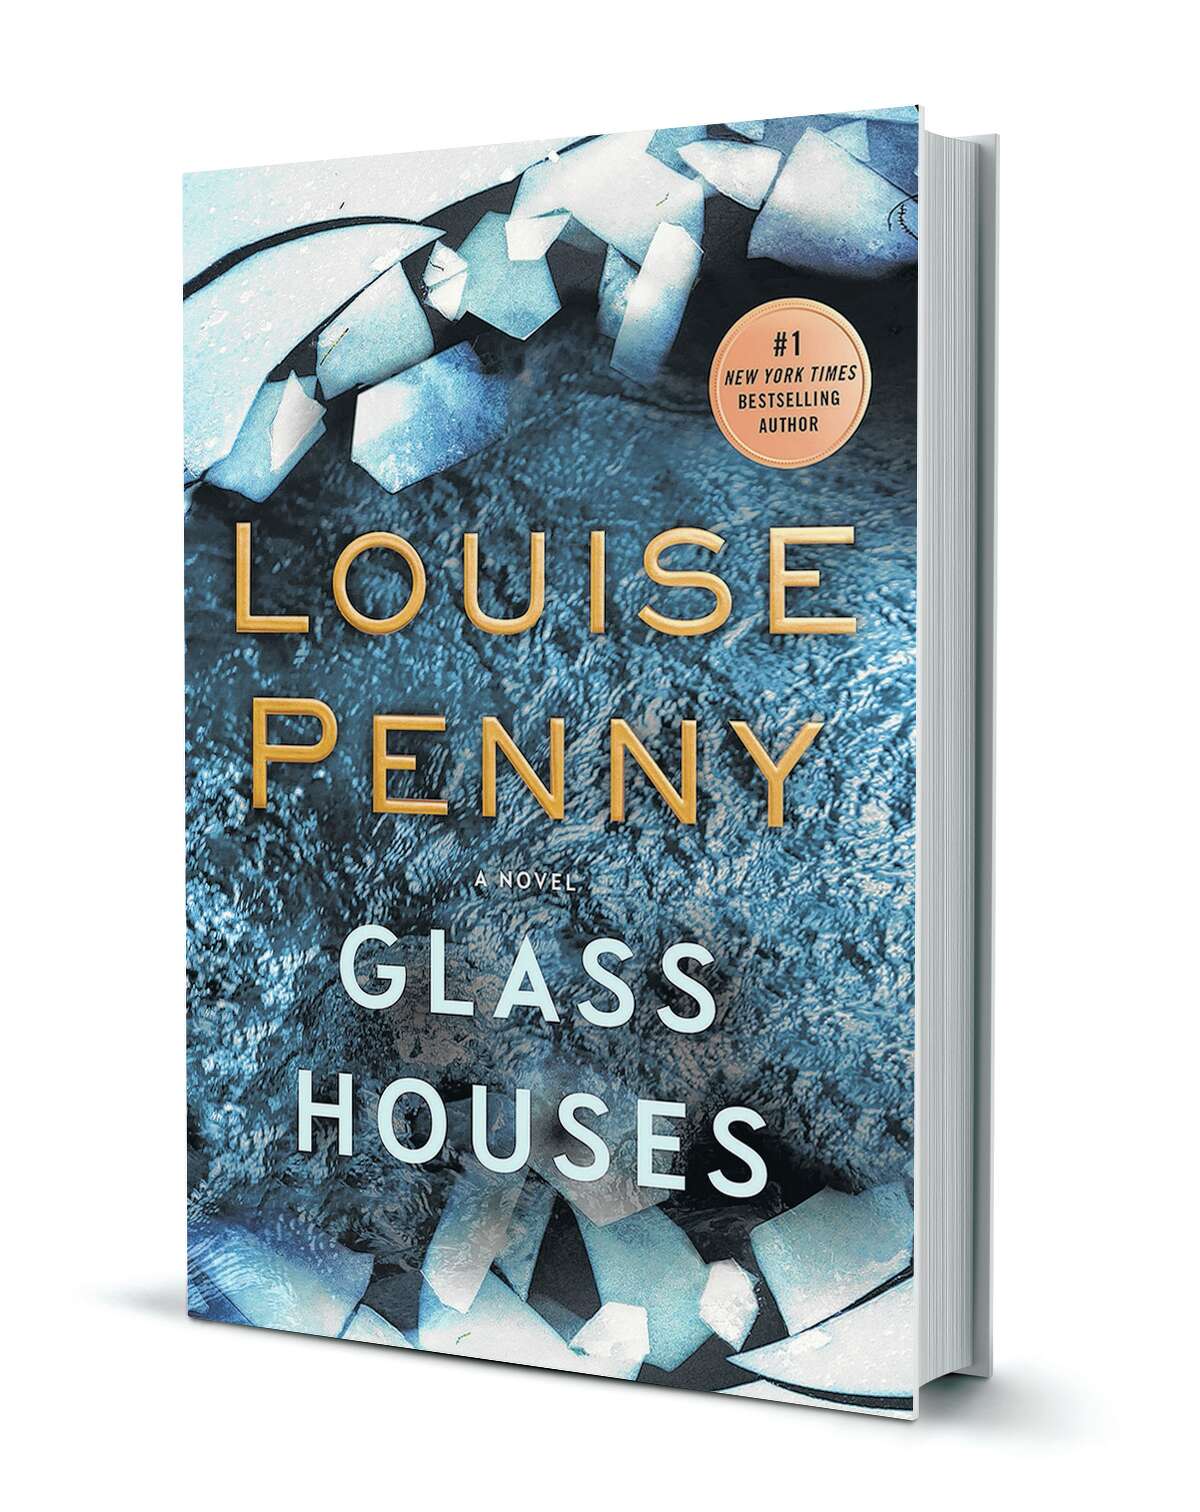 Louise Penny's new thriller is a story of shame and conscience